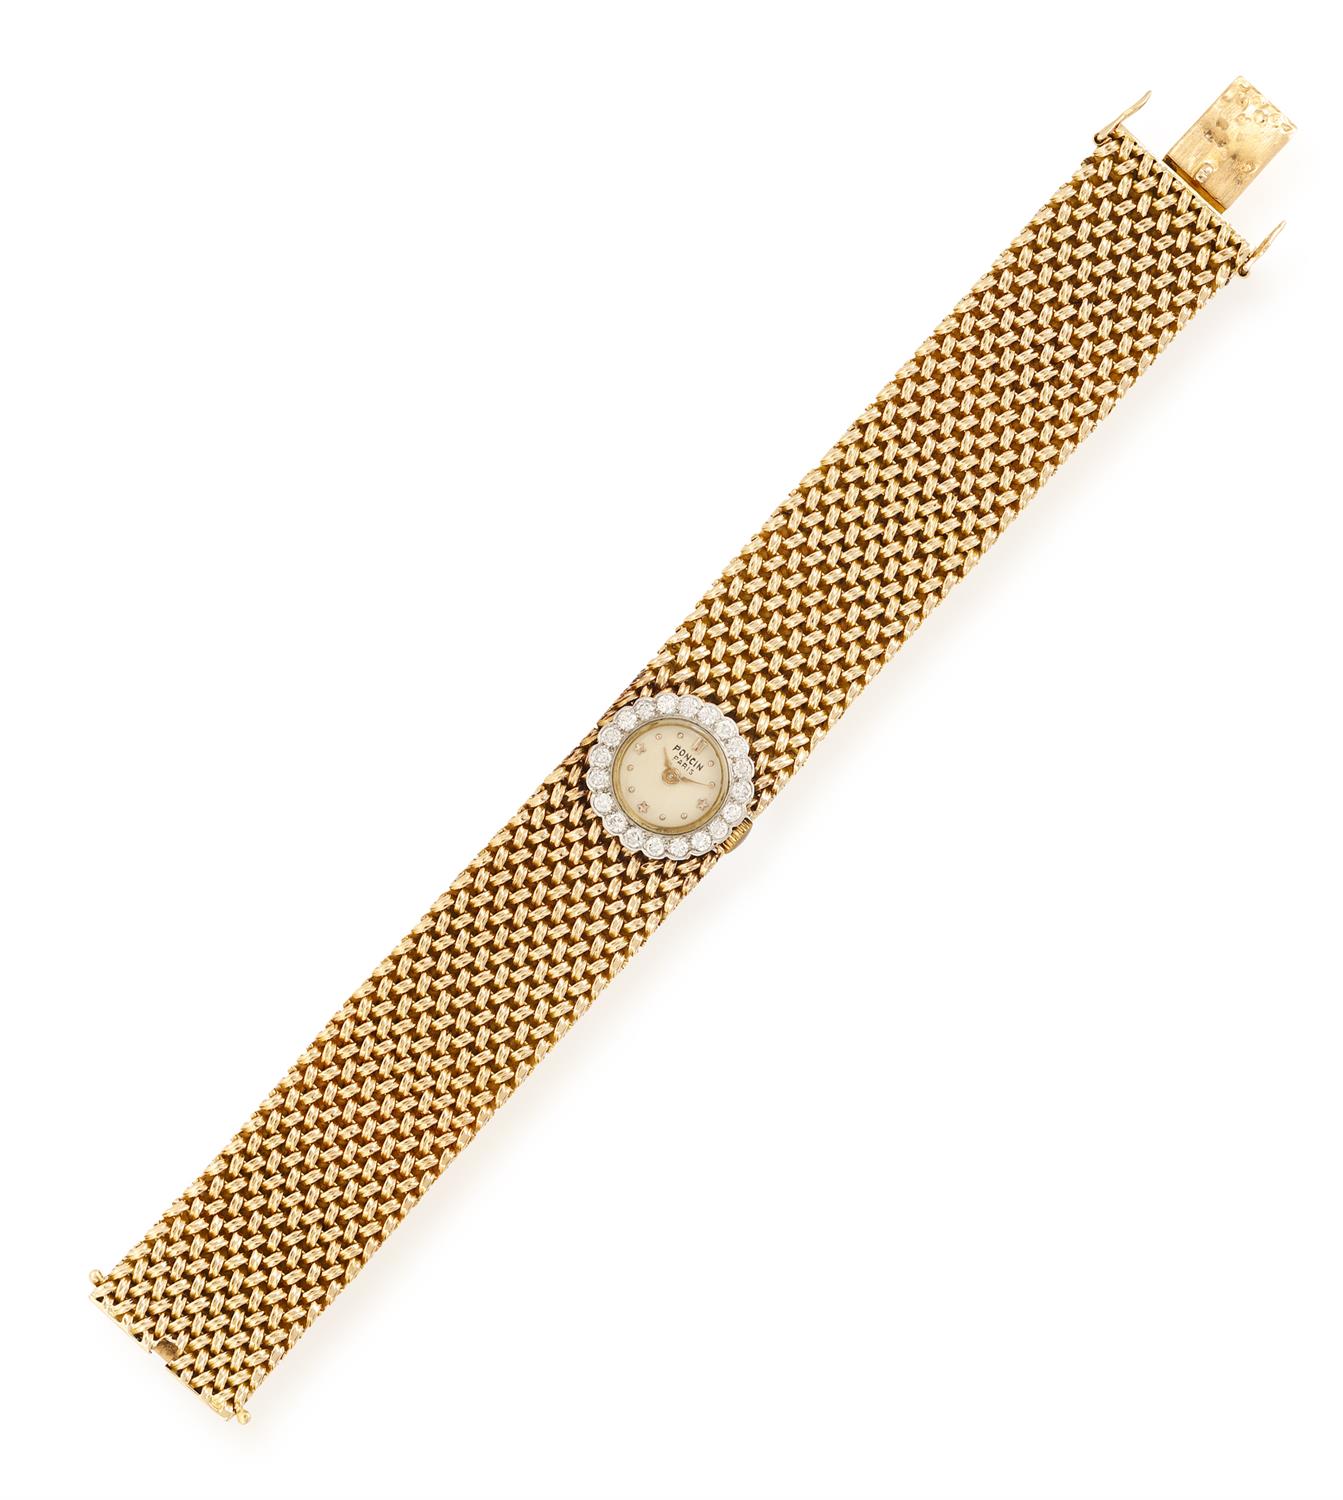 A LADY'S DIAMOND COCKTAIL WATCH, BY PONCIN PARIS, CIRCA 1960 The 17-jewel manual wind movement,